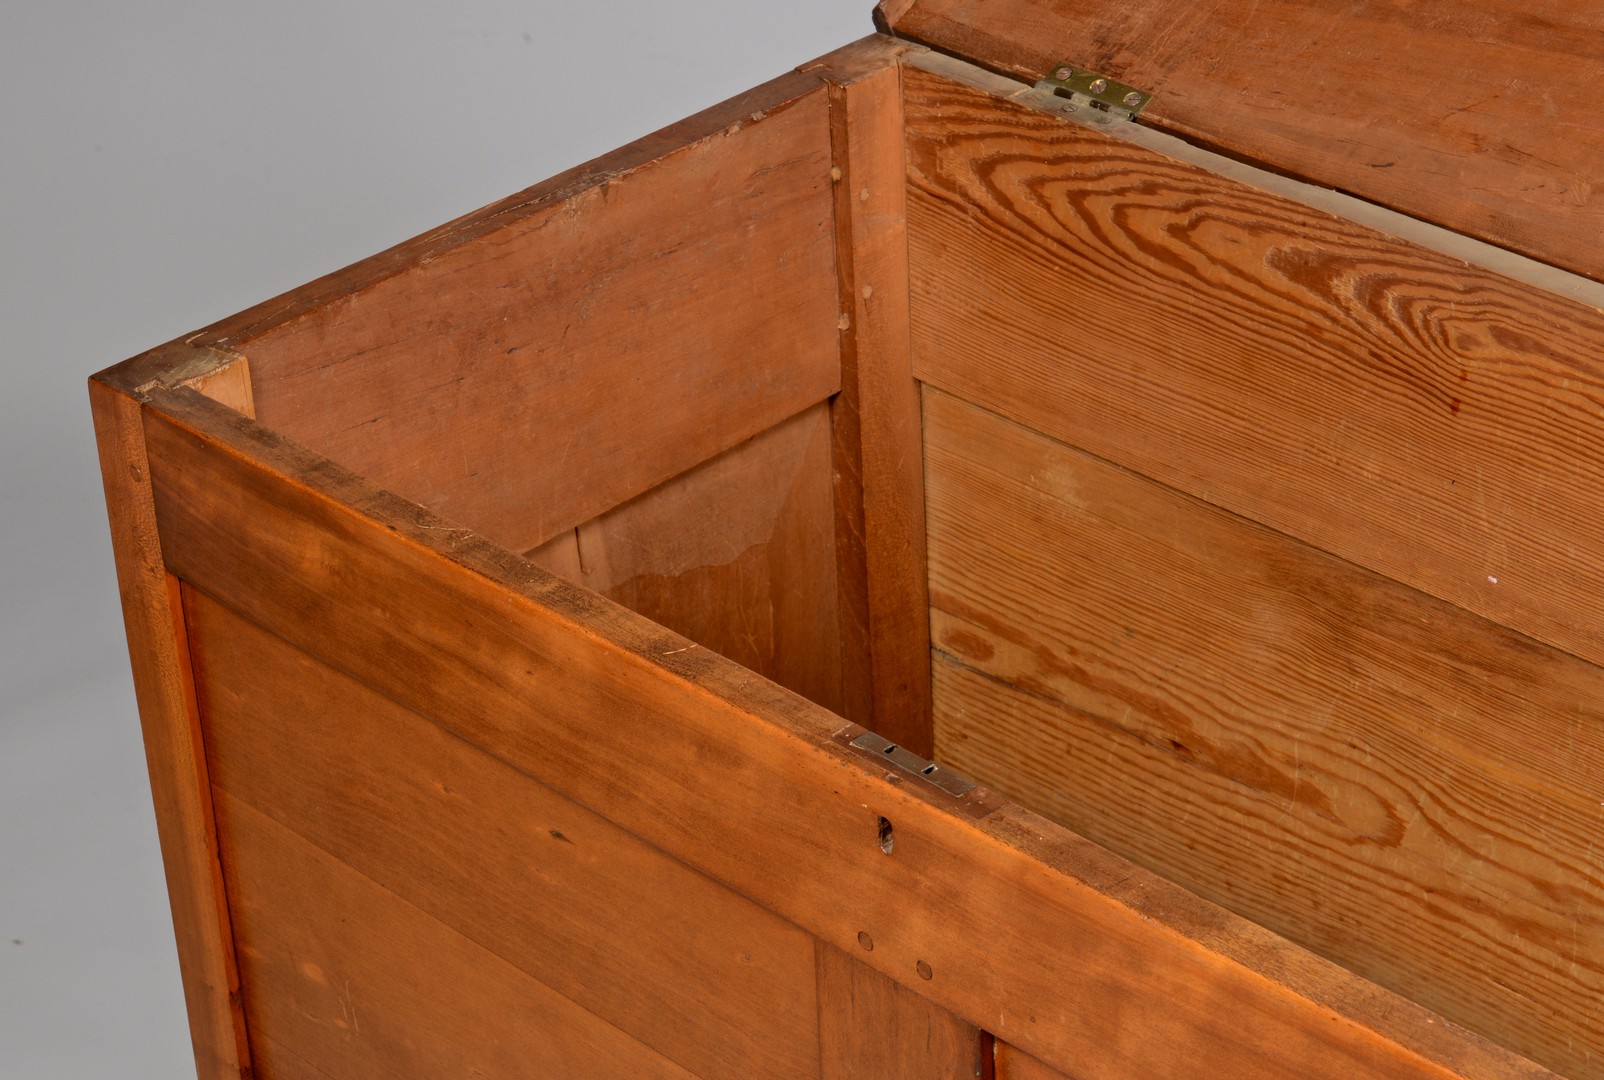 Lot 284: Southern Lift top chest of drawers, Yellow Pine Se